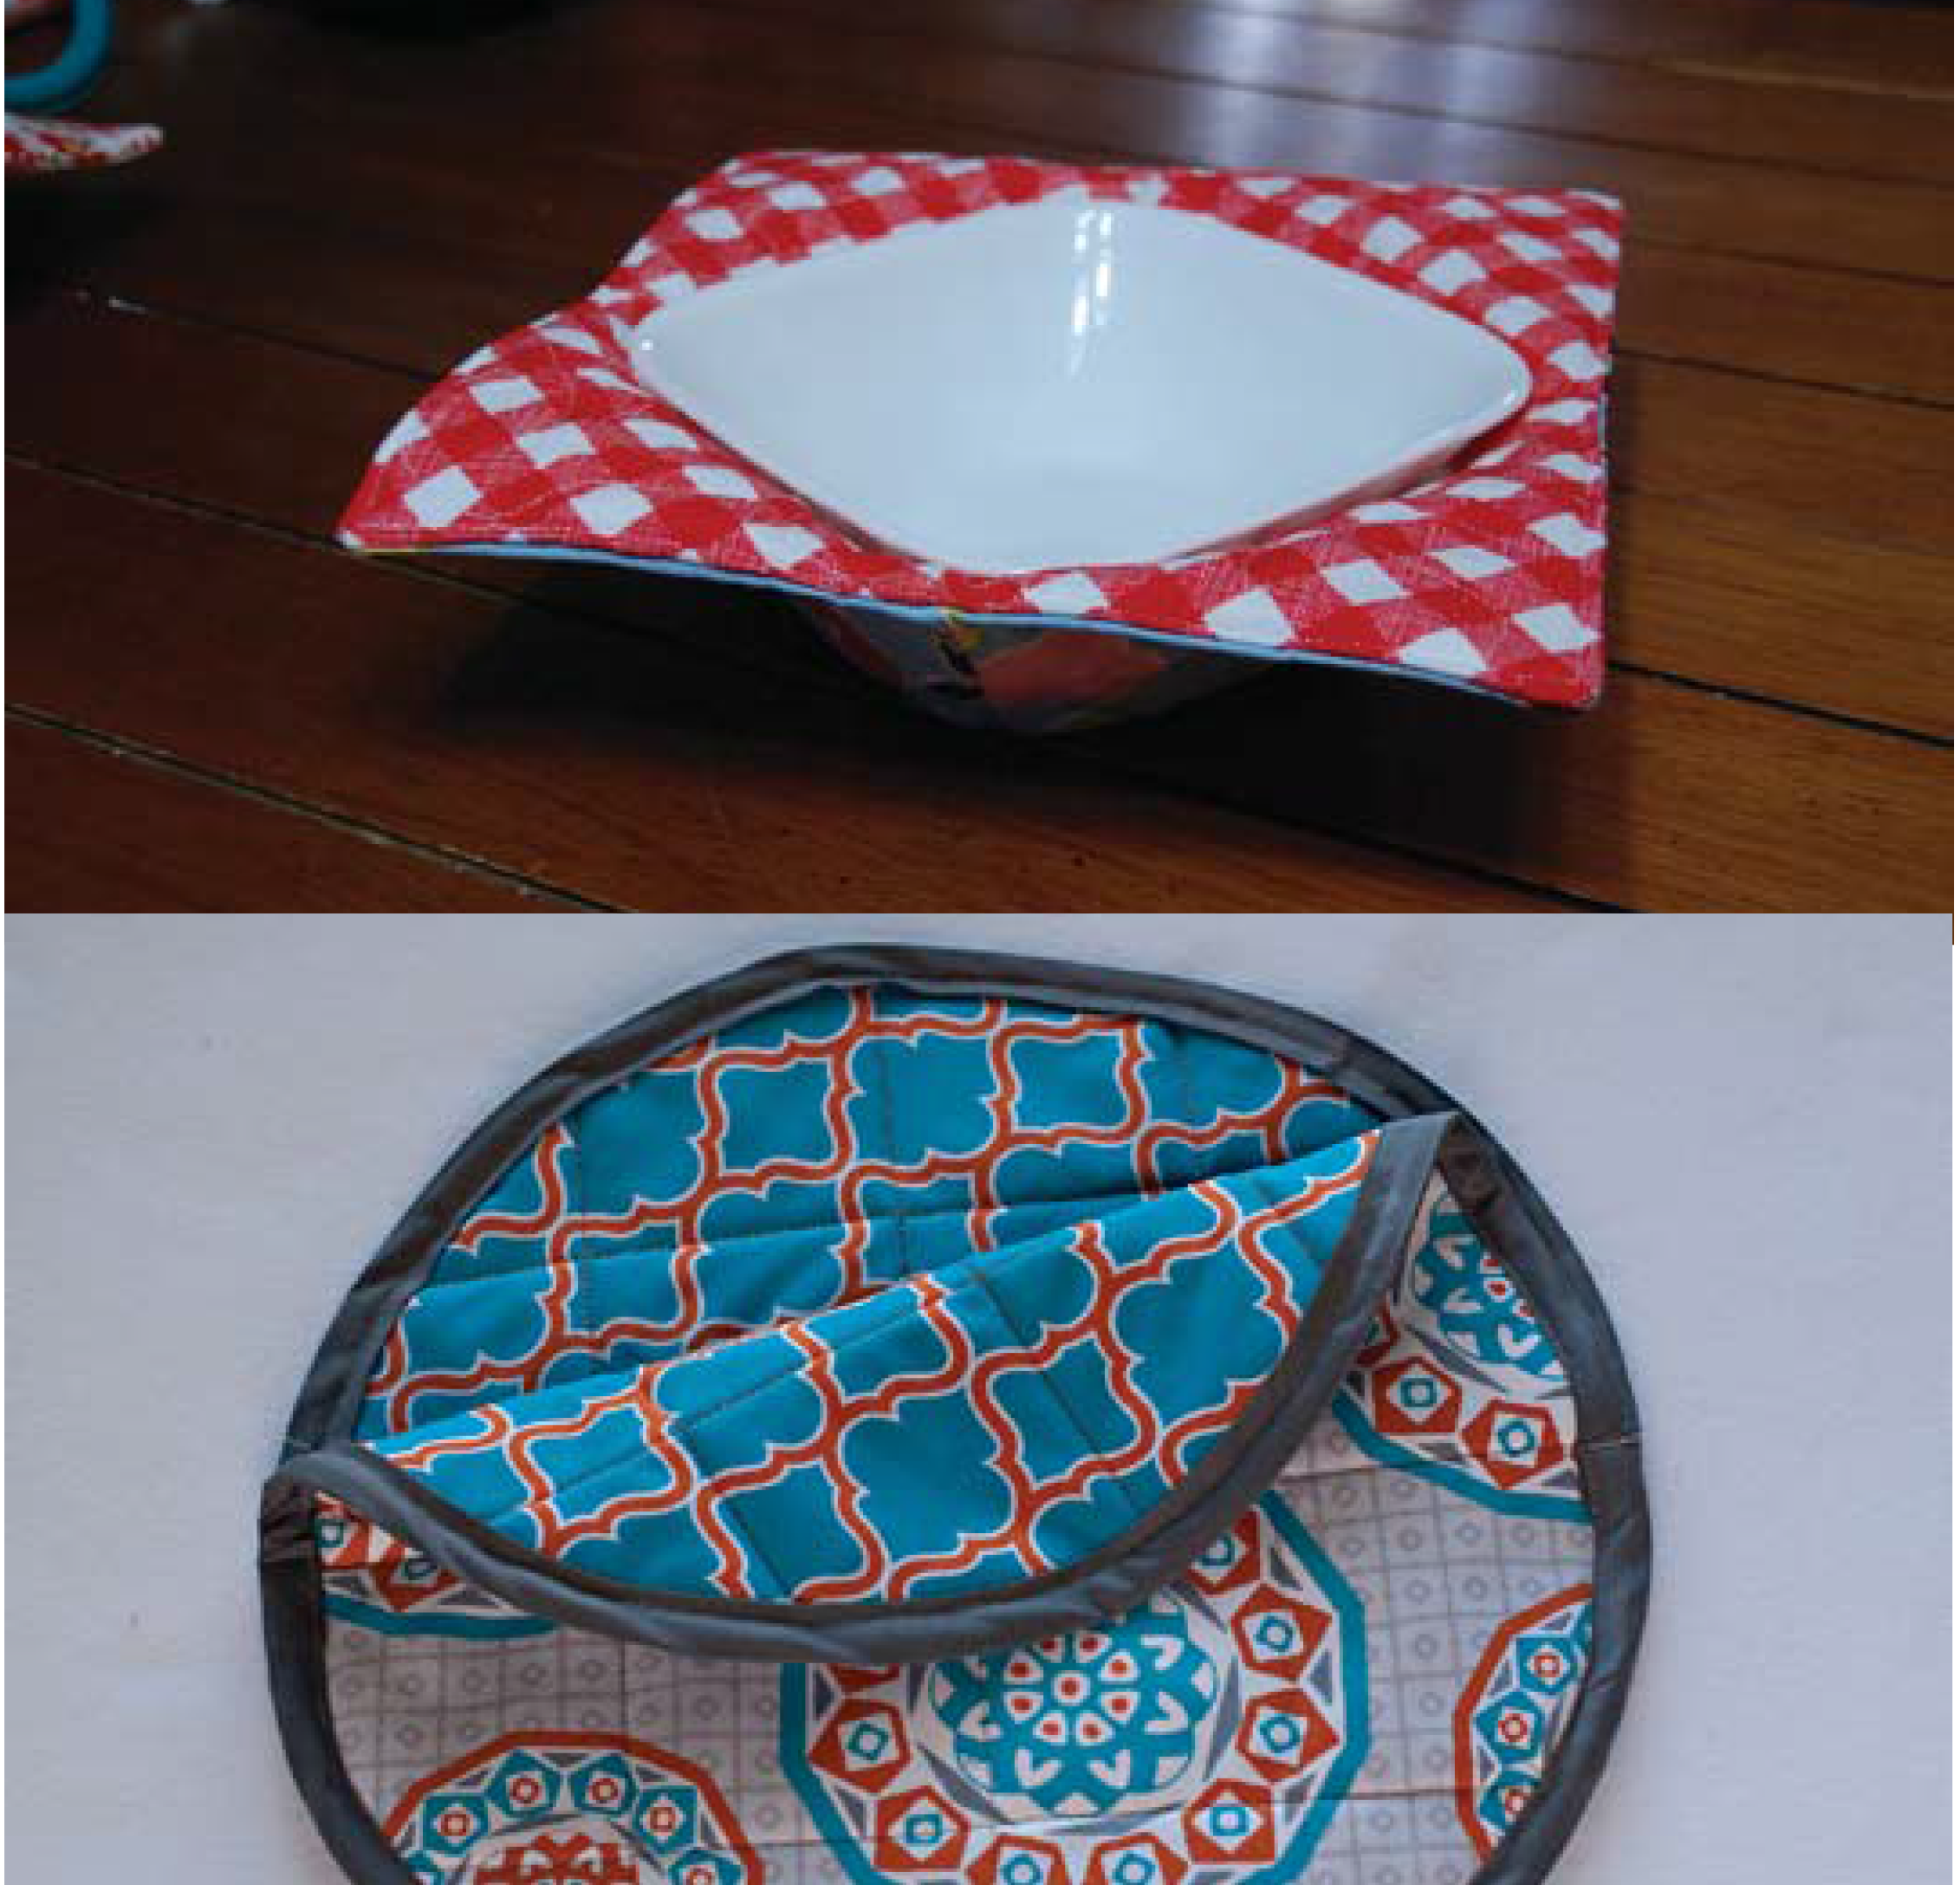 http://www.eymm.com/wp-content/uploads/2014/11/EYMM-Bowl-Cozy-and-Tortilla-Warmer-Cover.png